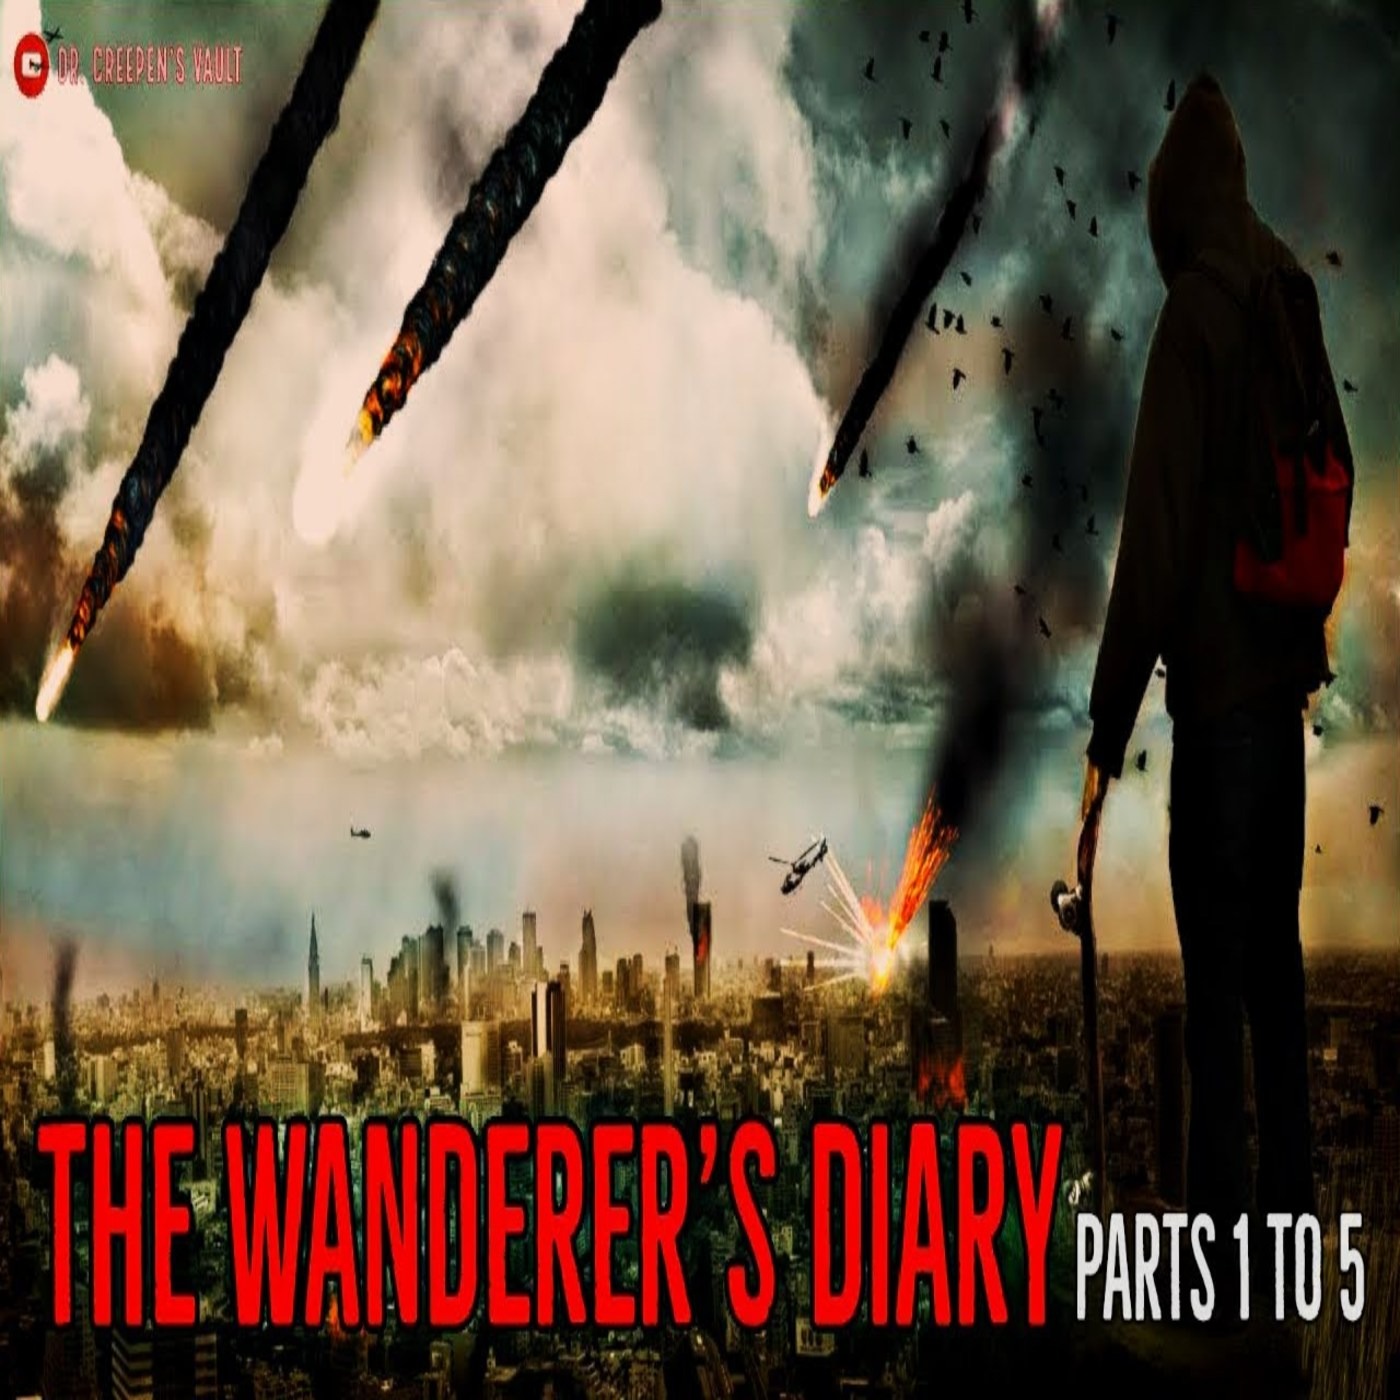 The Wanderer’s Diary